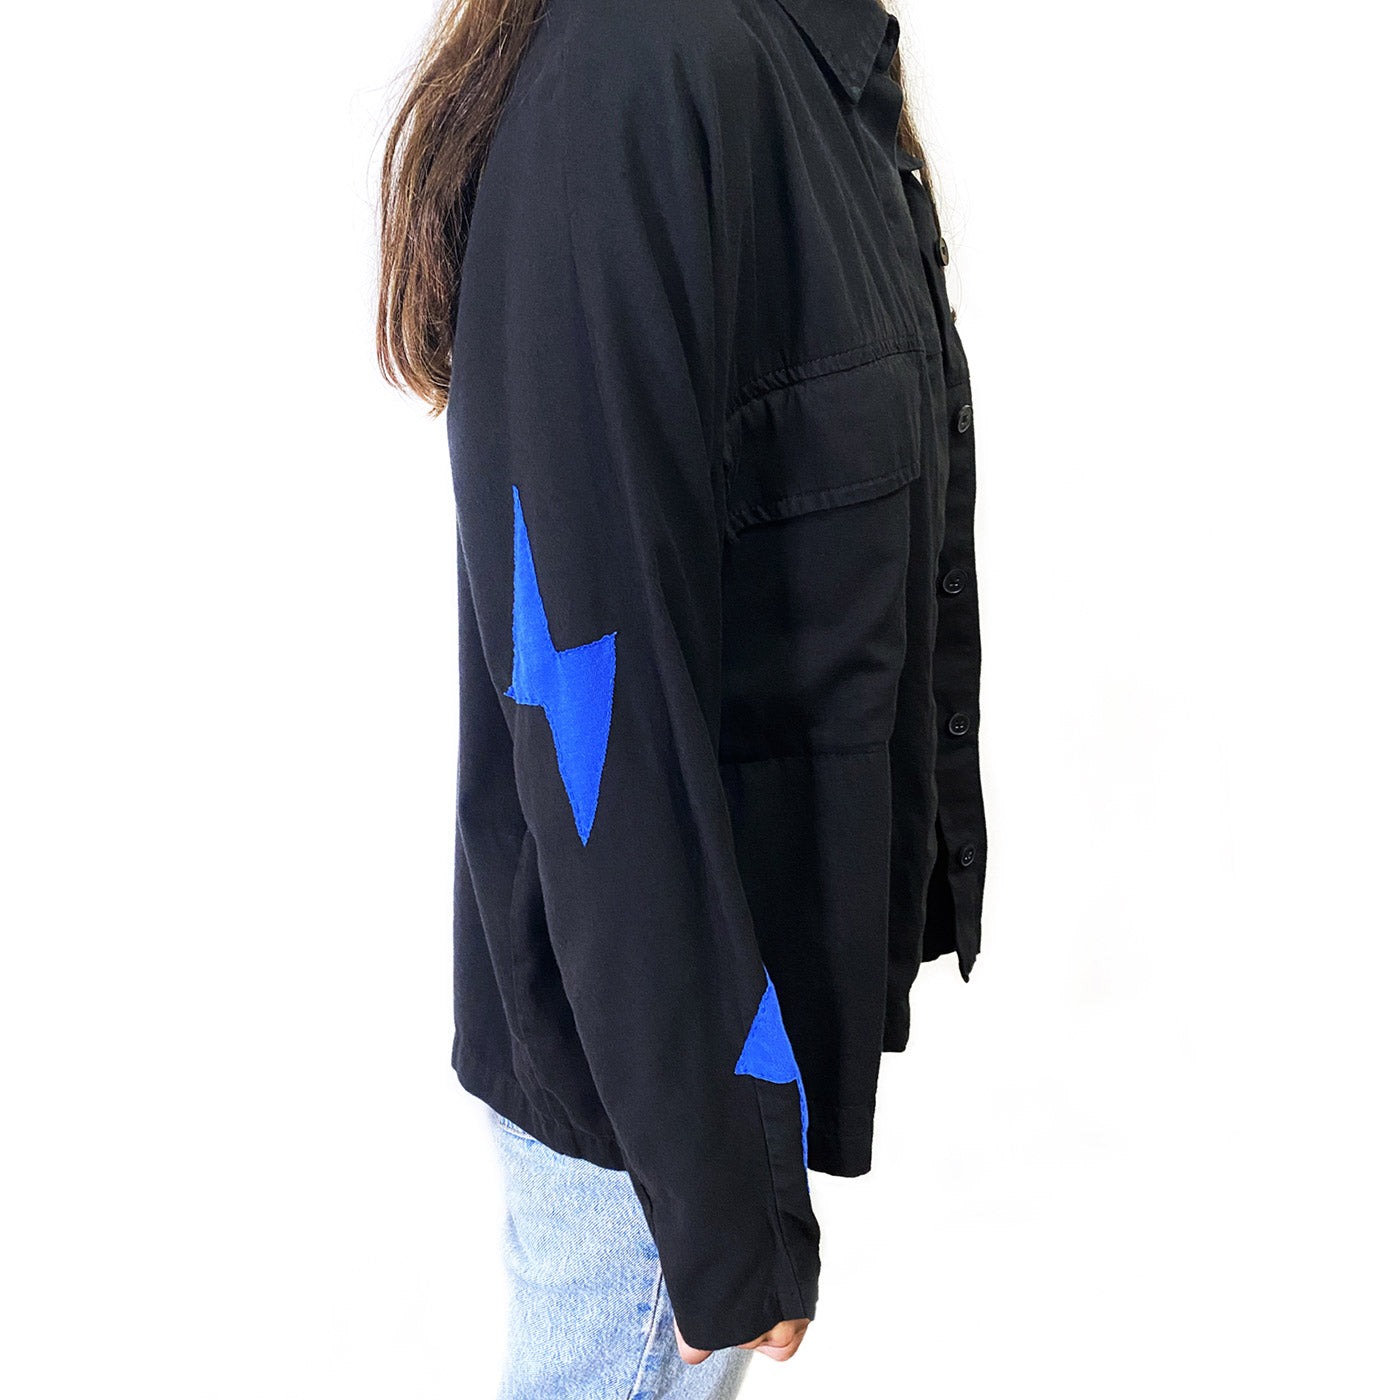 Side view of a person showing the right arm of a black jacket with blue lightening bolts sewn it on with blue stitches